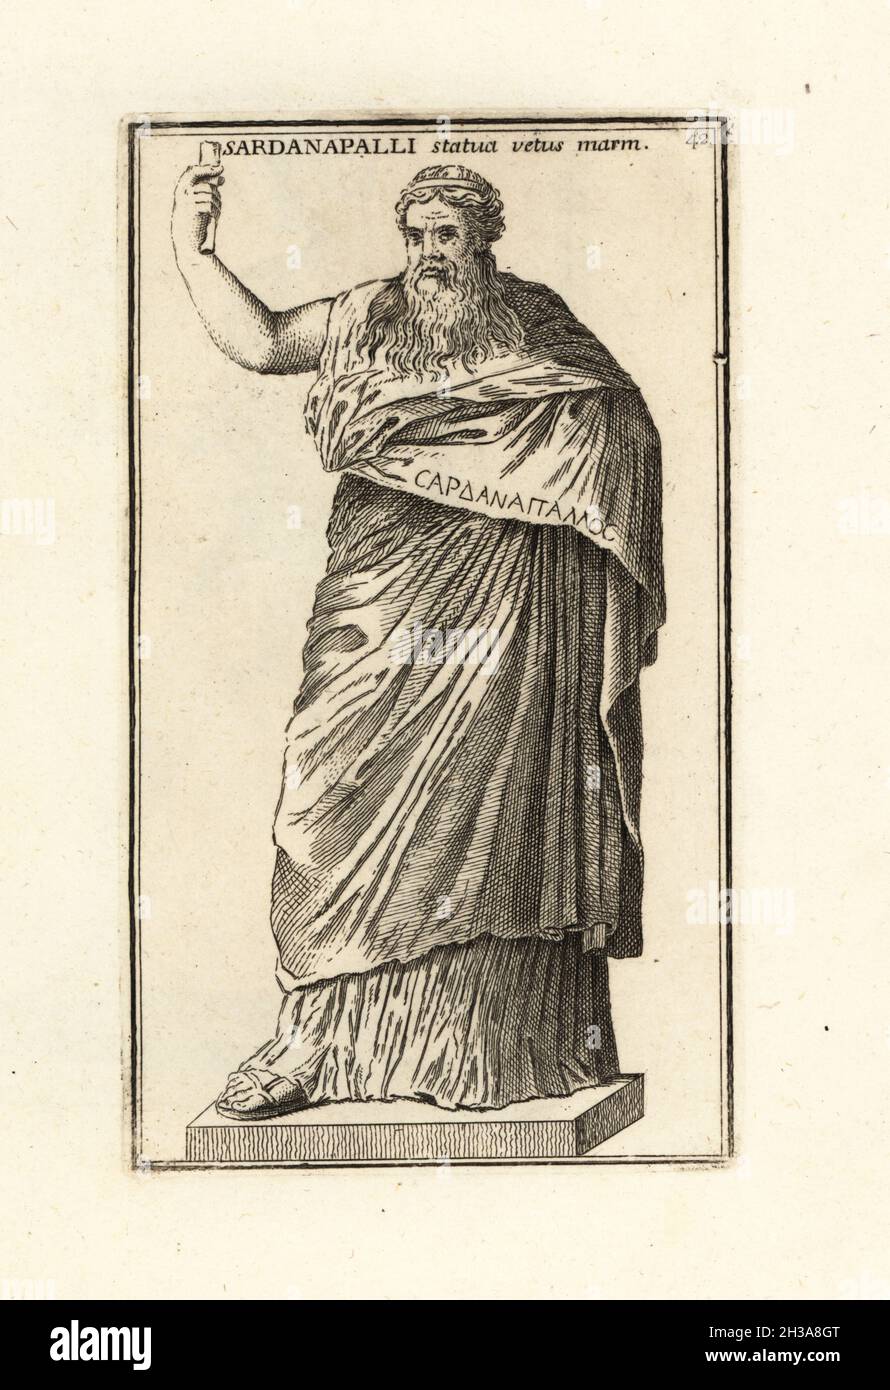 Statue of Dionysus Sardanapalus, Neo-Attic statue of the Greek god Dionysus as an old man with ivy wreath and long beard. Roman copy of a Greek orirginal from the 4th century BC, now in the Vatican. Sardanapalli statua vetus marmorea. Copperplate engraving by Giovanni Battista Cannetti from Copperplates of the most beautiful ancient statues of Rome, Calcografia di piu belle statue antiche a Roma, engraved by Cannetti all'Arco della Ciambella, published by Gaetano Quojani, Rome, 1779. Stock Photo